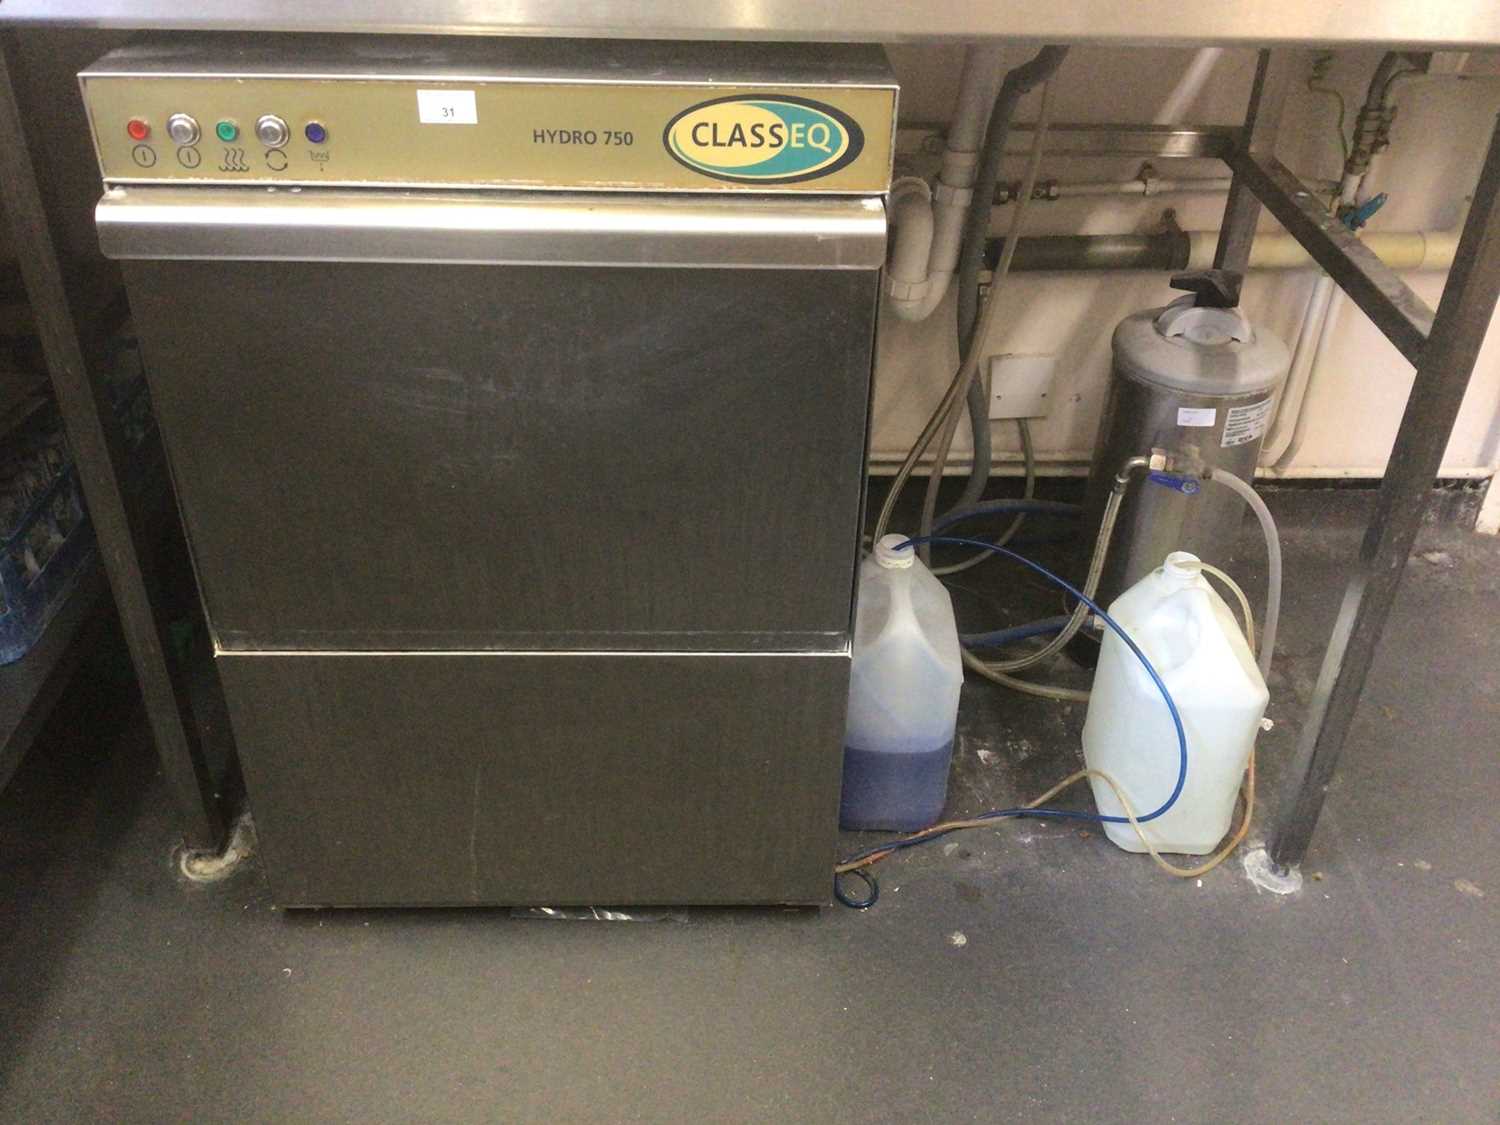 Lot 31 - A Classeq Hydro 750 stainless steel glass washer, with water softener, cable and plug